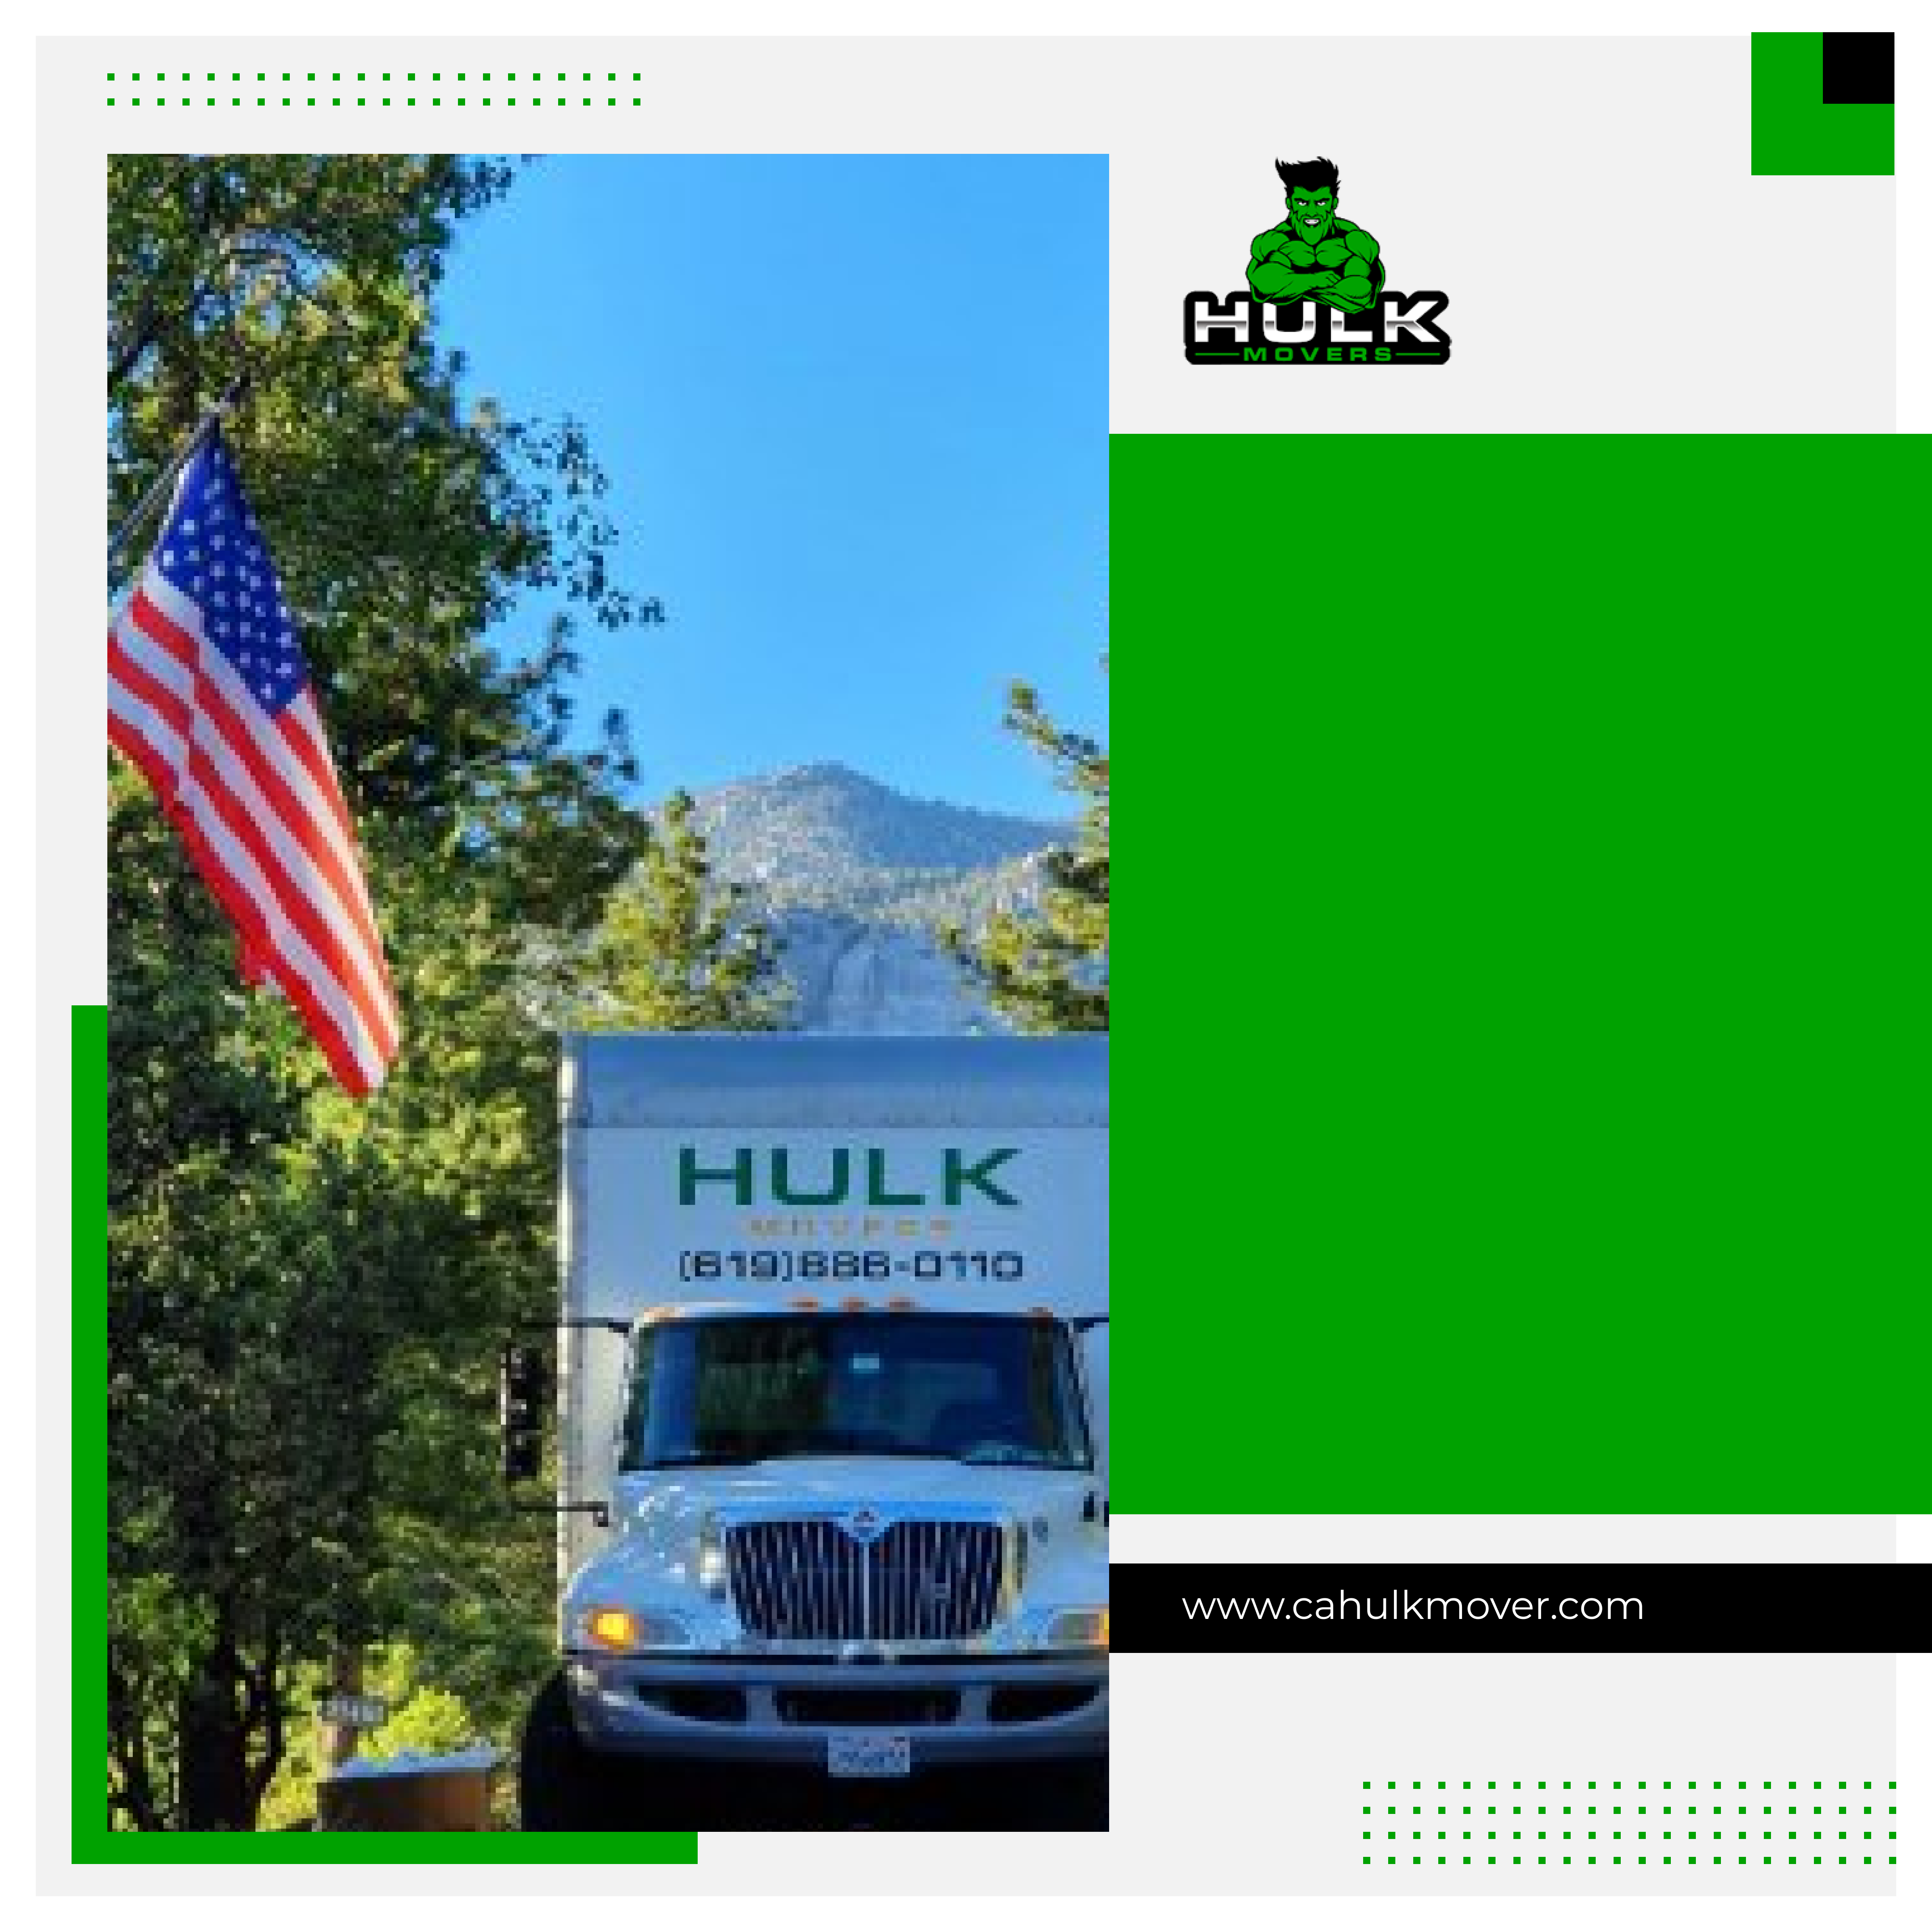 Why Hulk Movers Offers Best Senior Moving Services